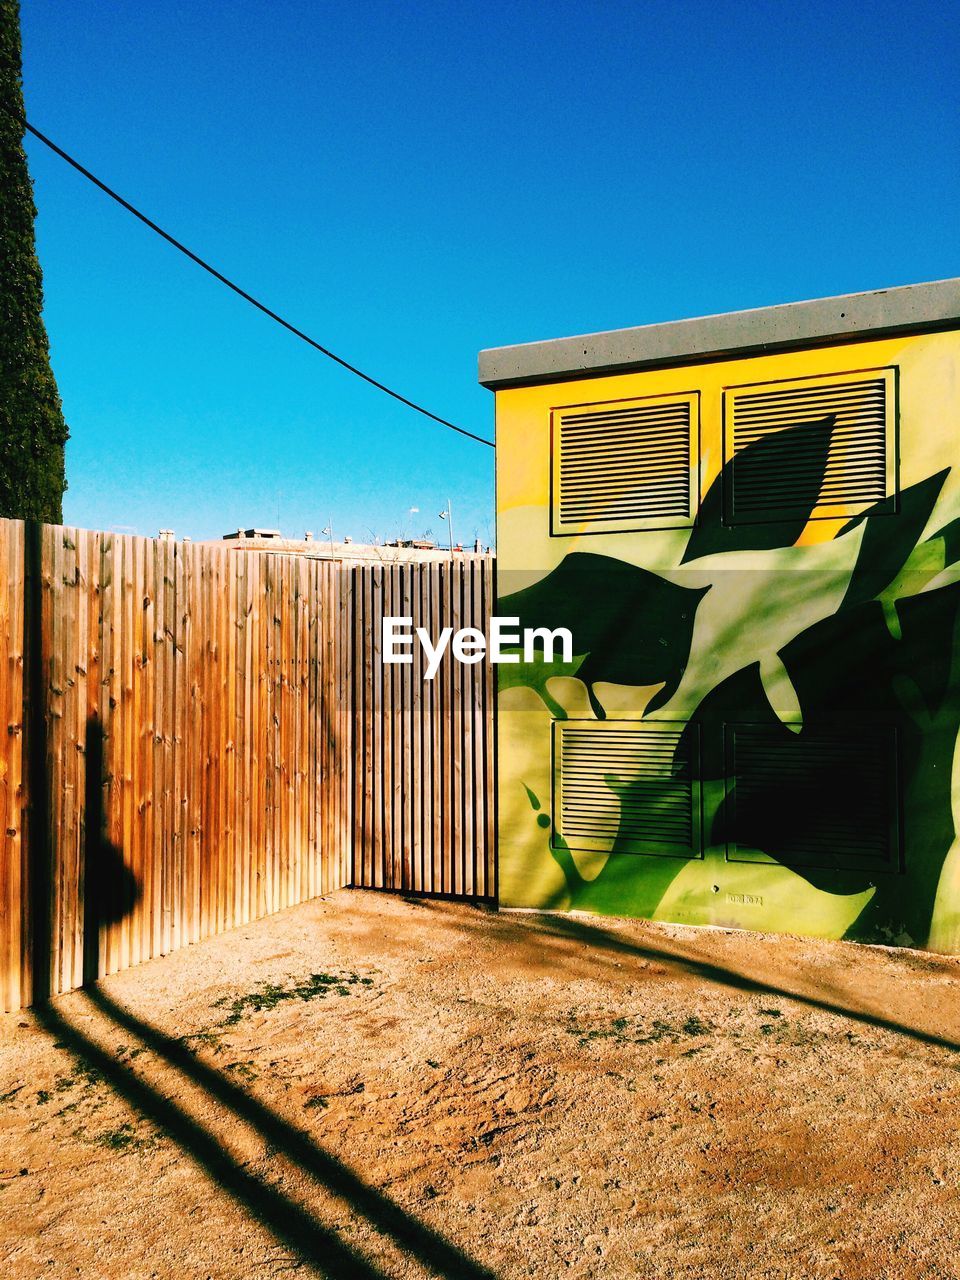 Graffiti on cabin by wooden fence against clear blue sky